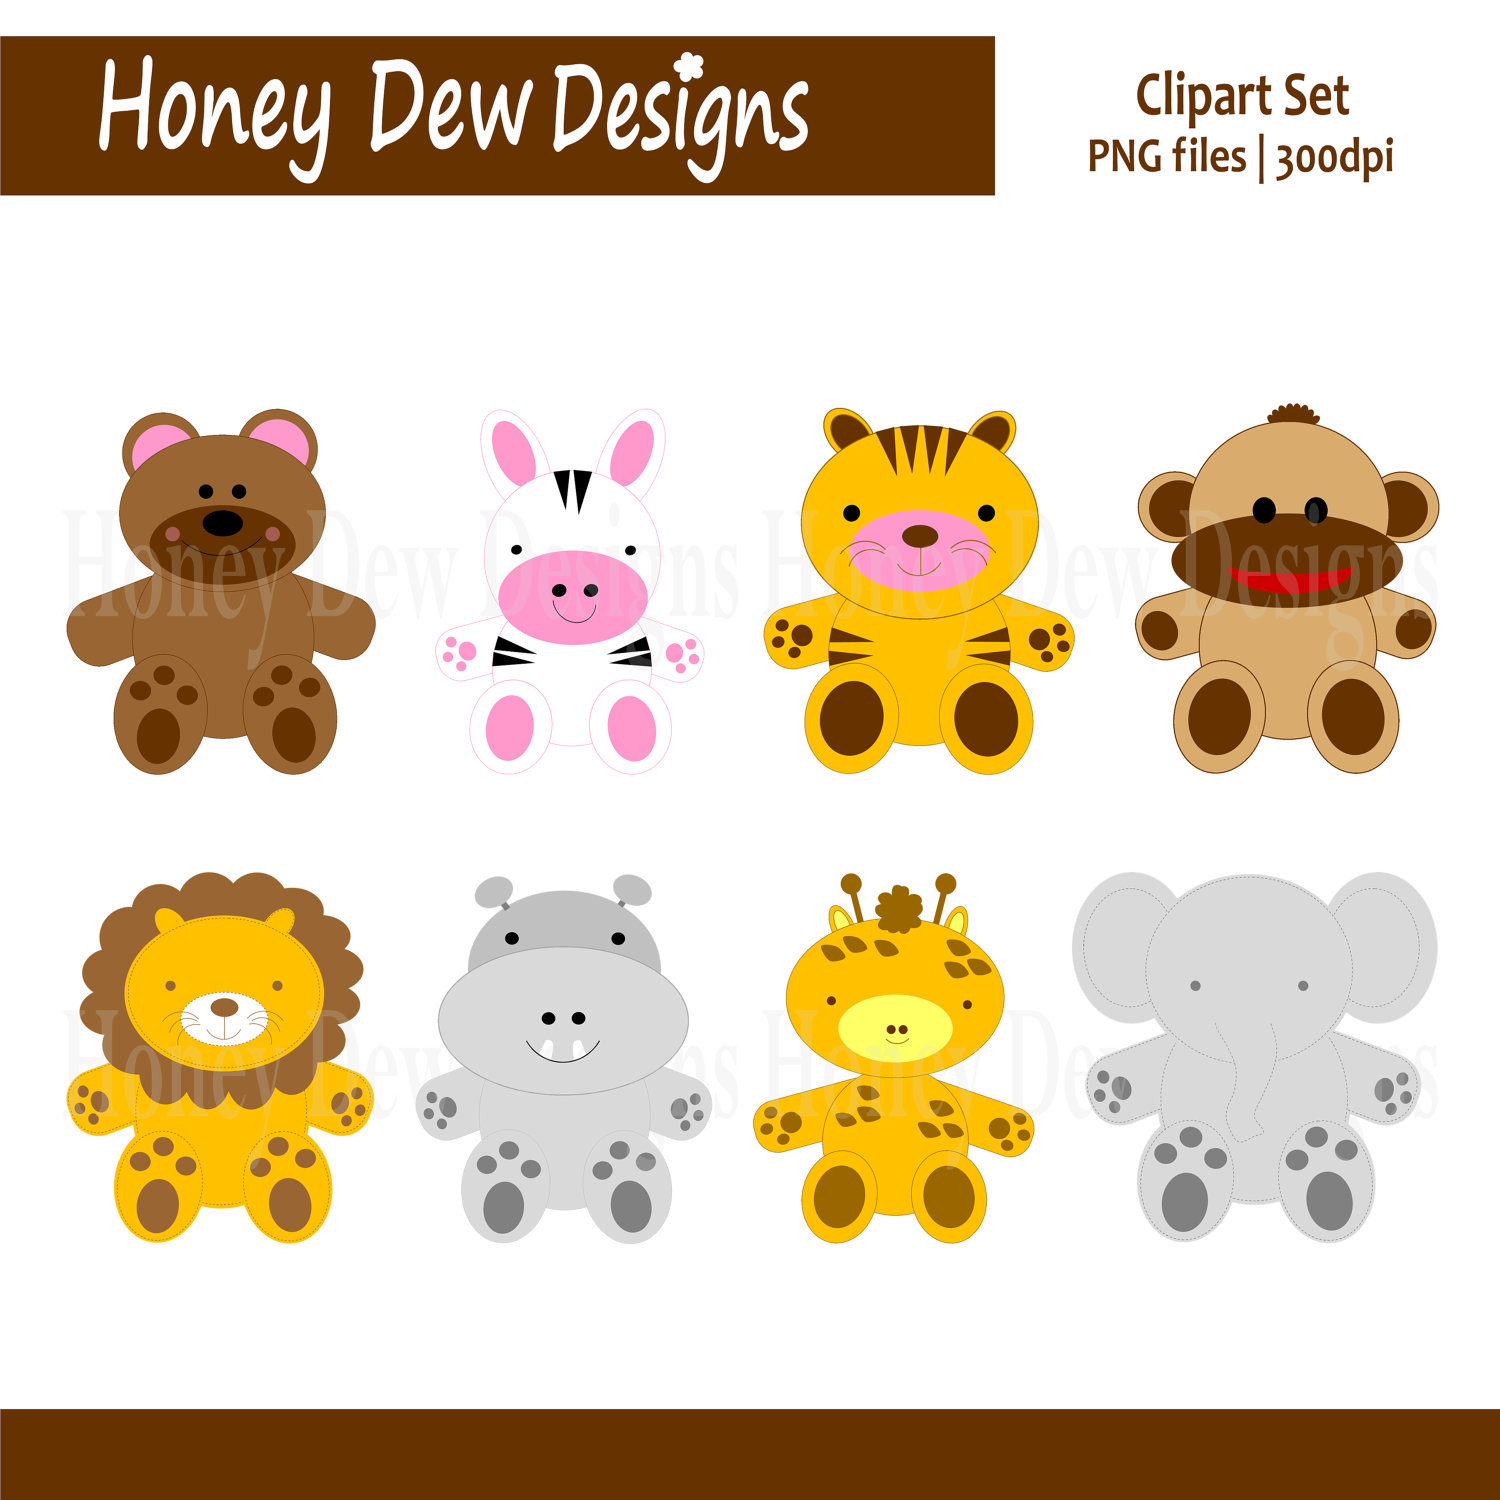 Clipart Package 063 Stuffed Animal Clipart By Honeydewdesign